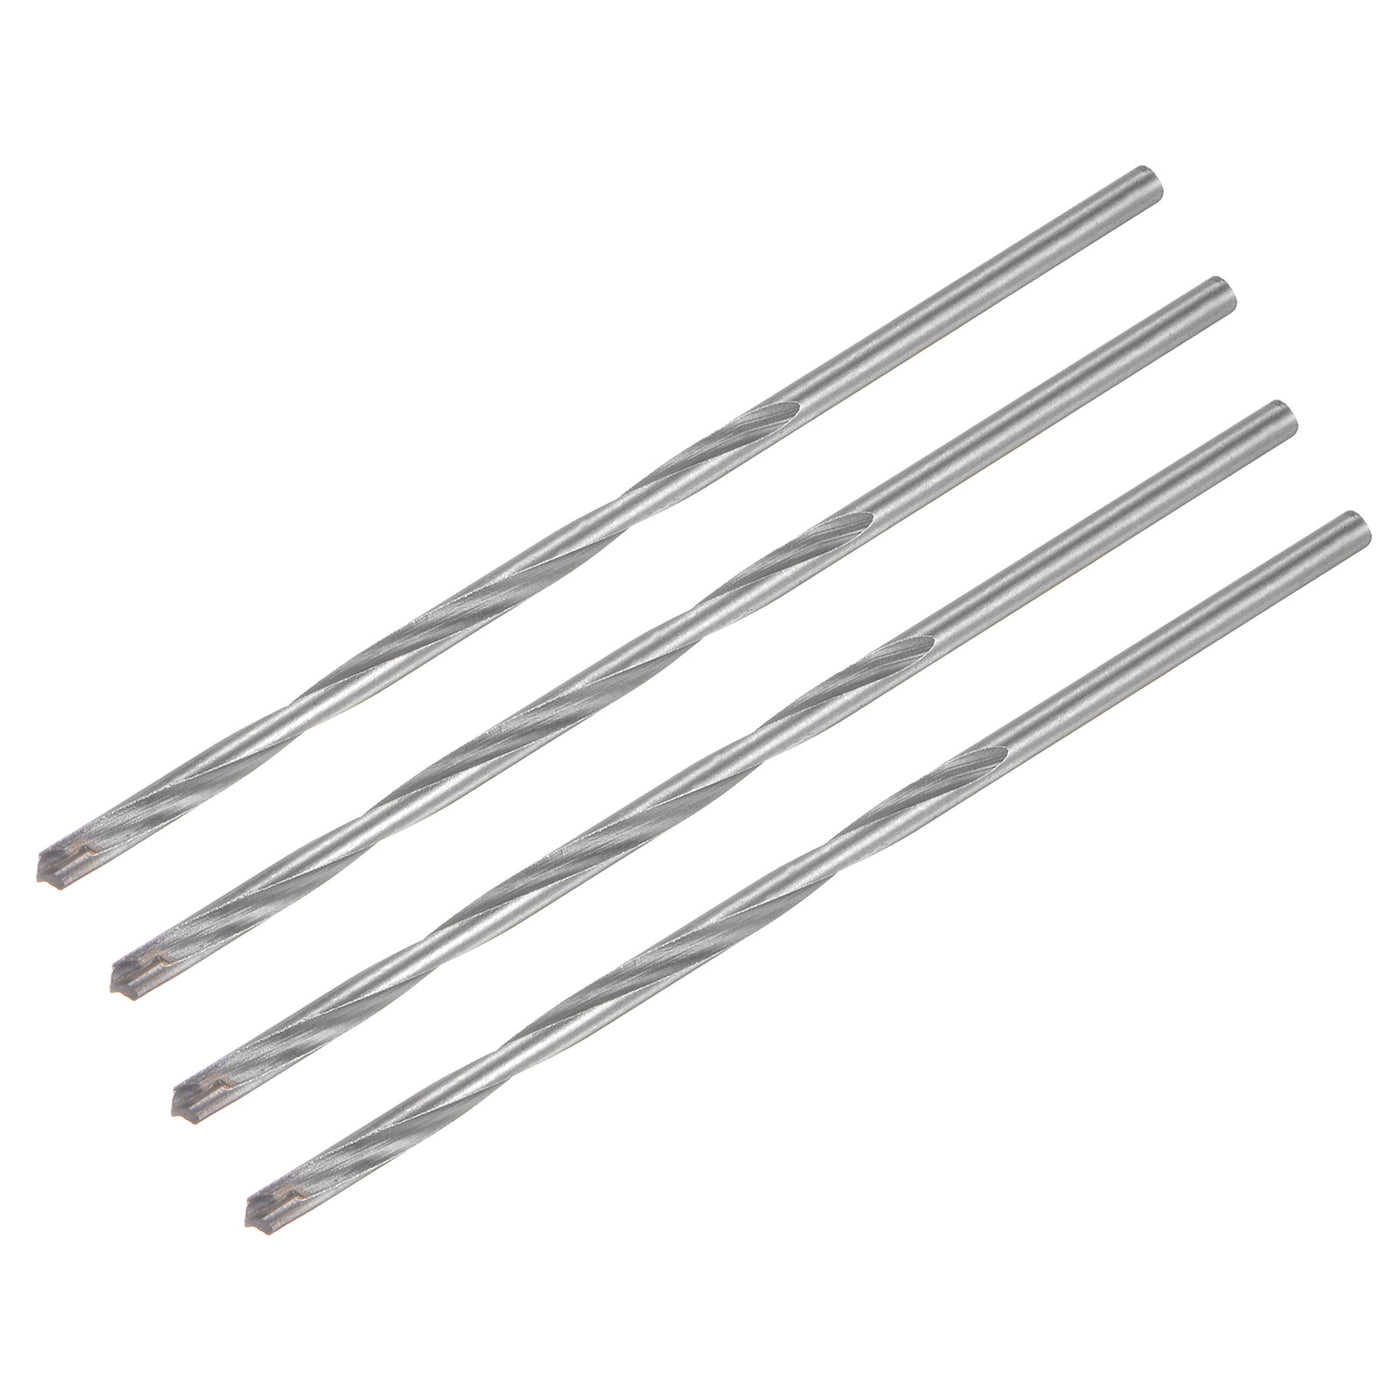 uxcell Uxcell 5mm Cutting Dia Round Shank Cemented Carbide Twist Drill Bit, 150mm Length 4 Pcs